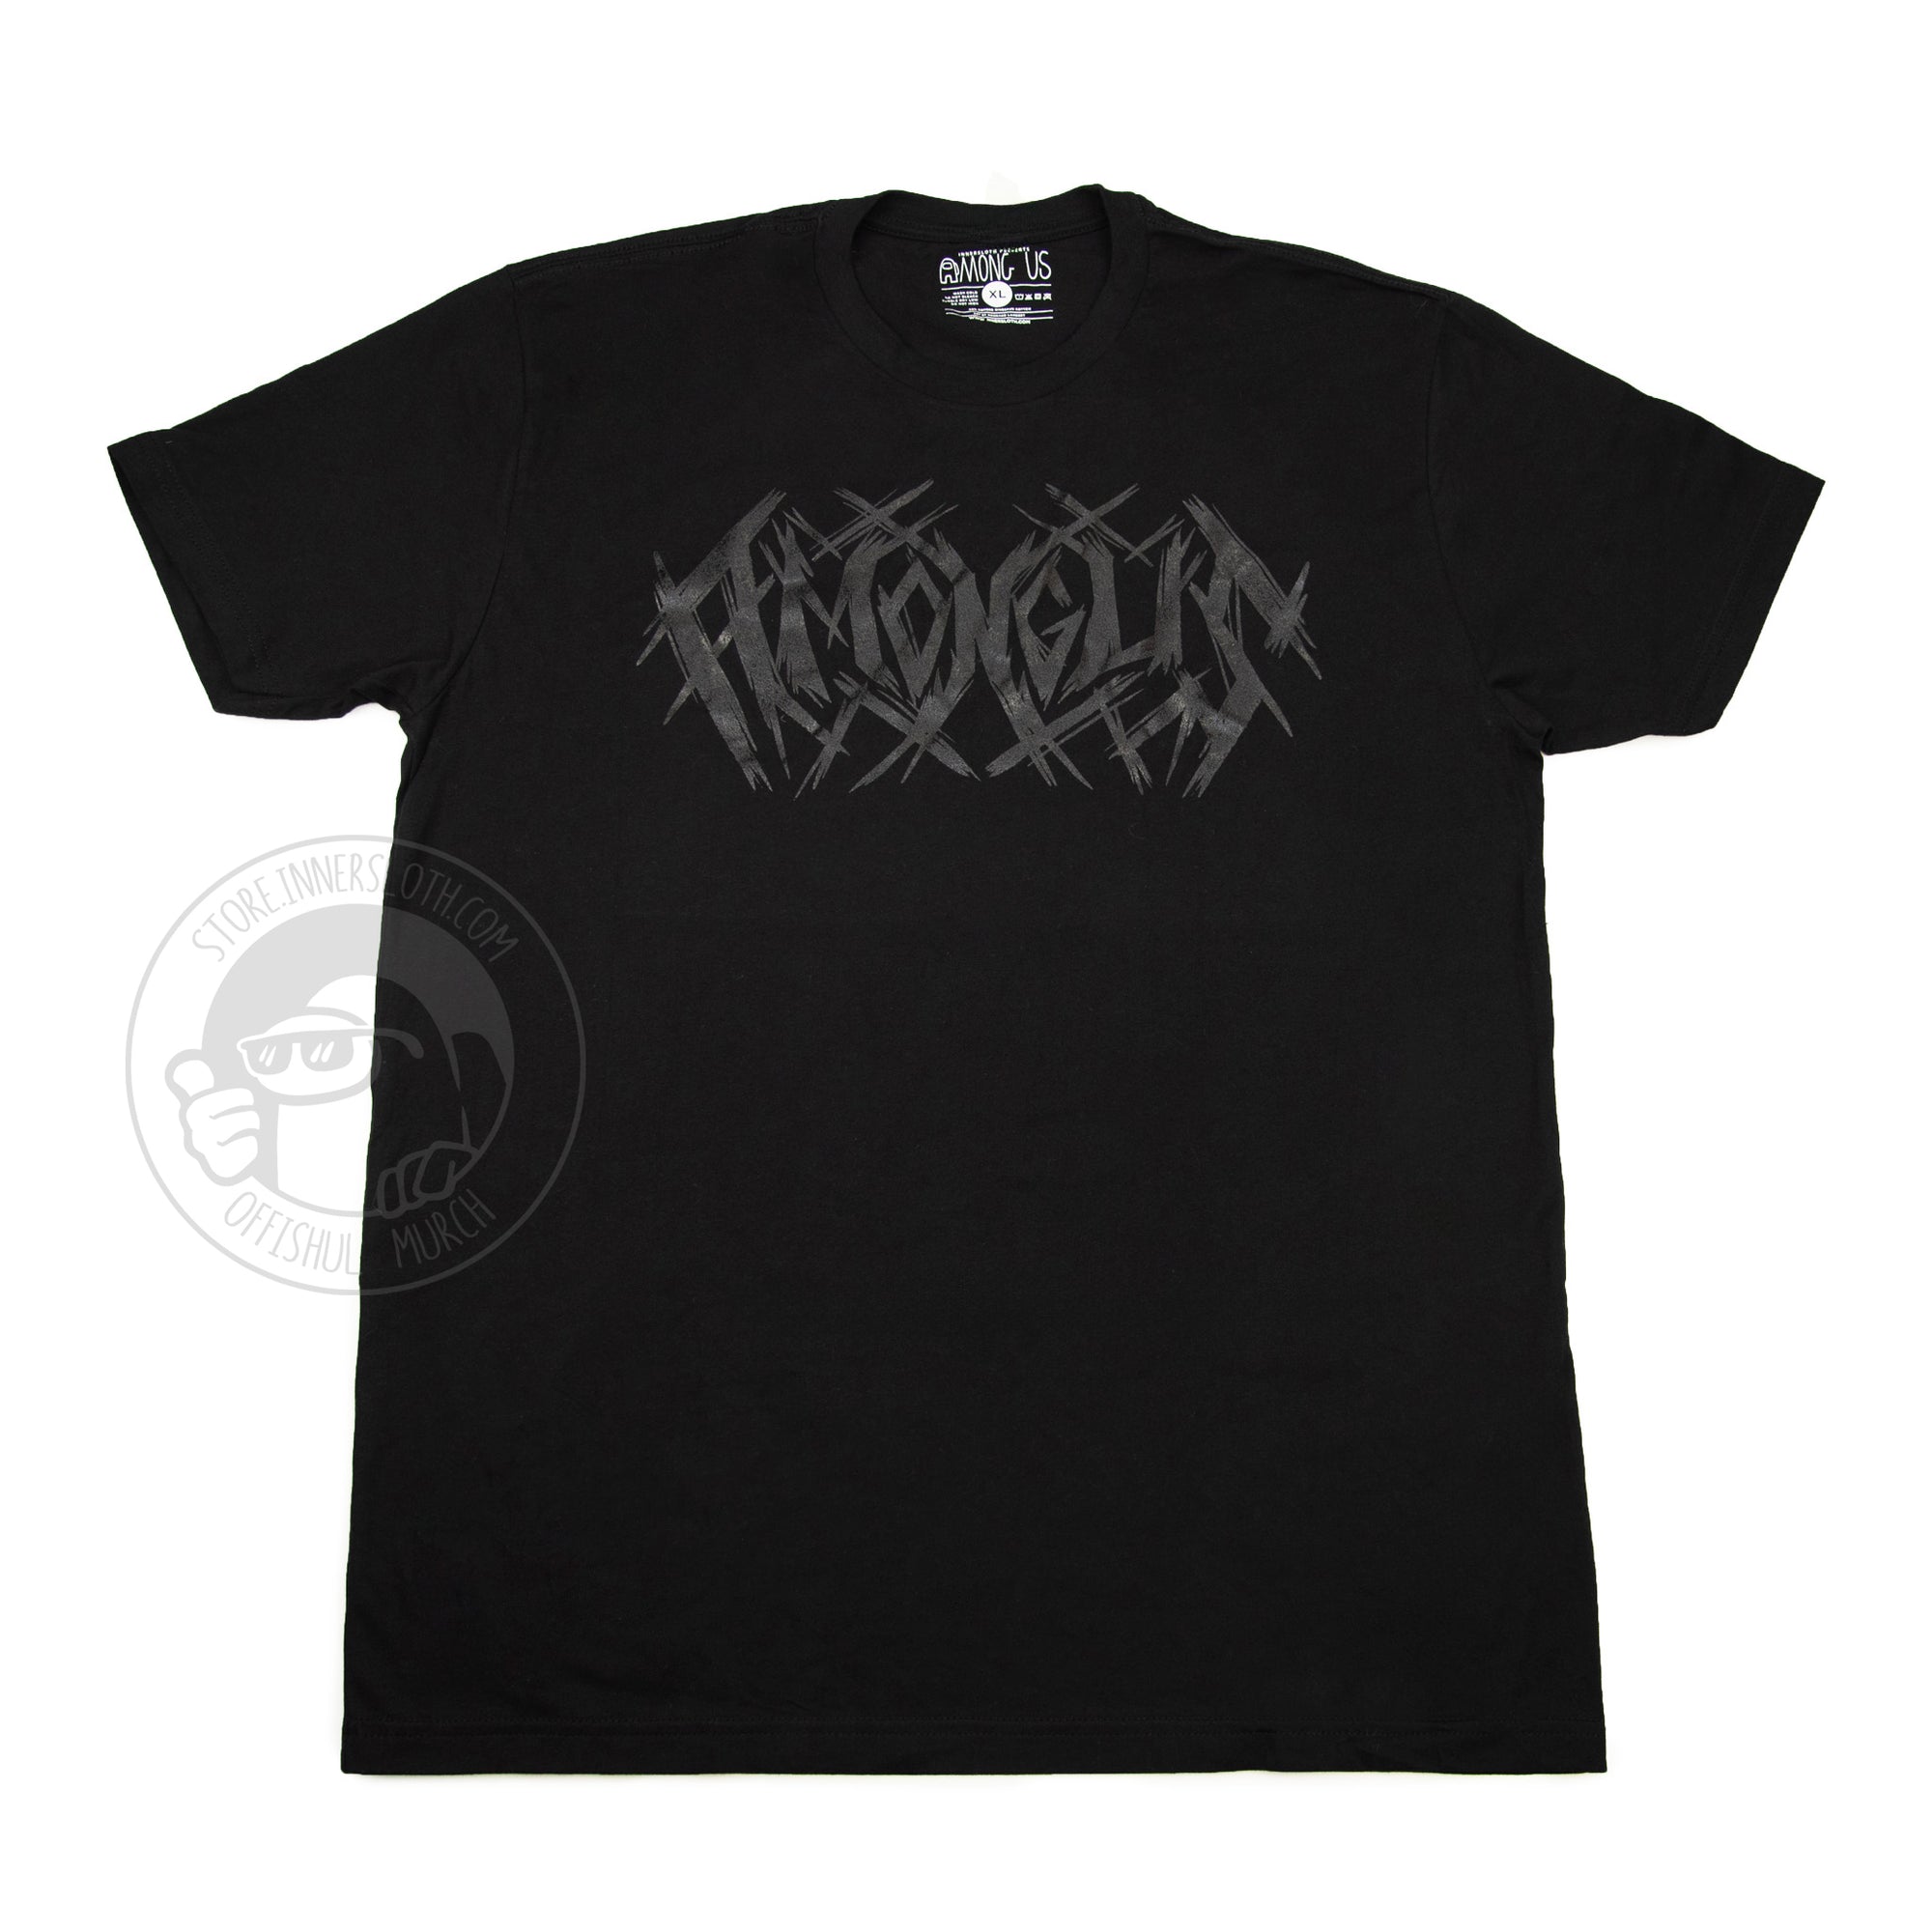  A flat-lay product photograph of the Black Metal Tee on a white background. The tee shirt is all black with a metallic silver graphic that reads “Among Us” in a metal logo font.